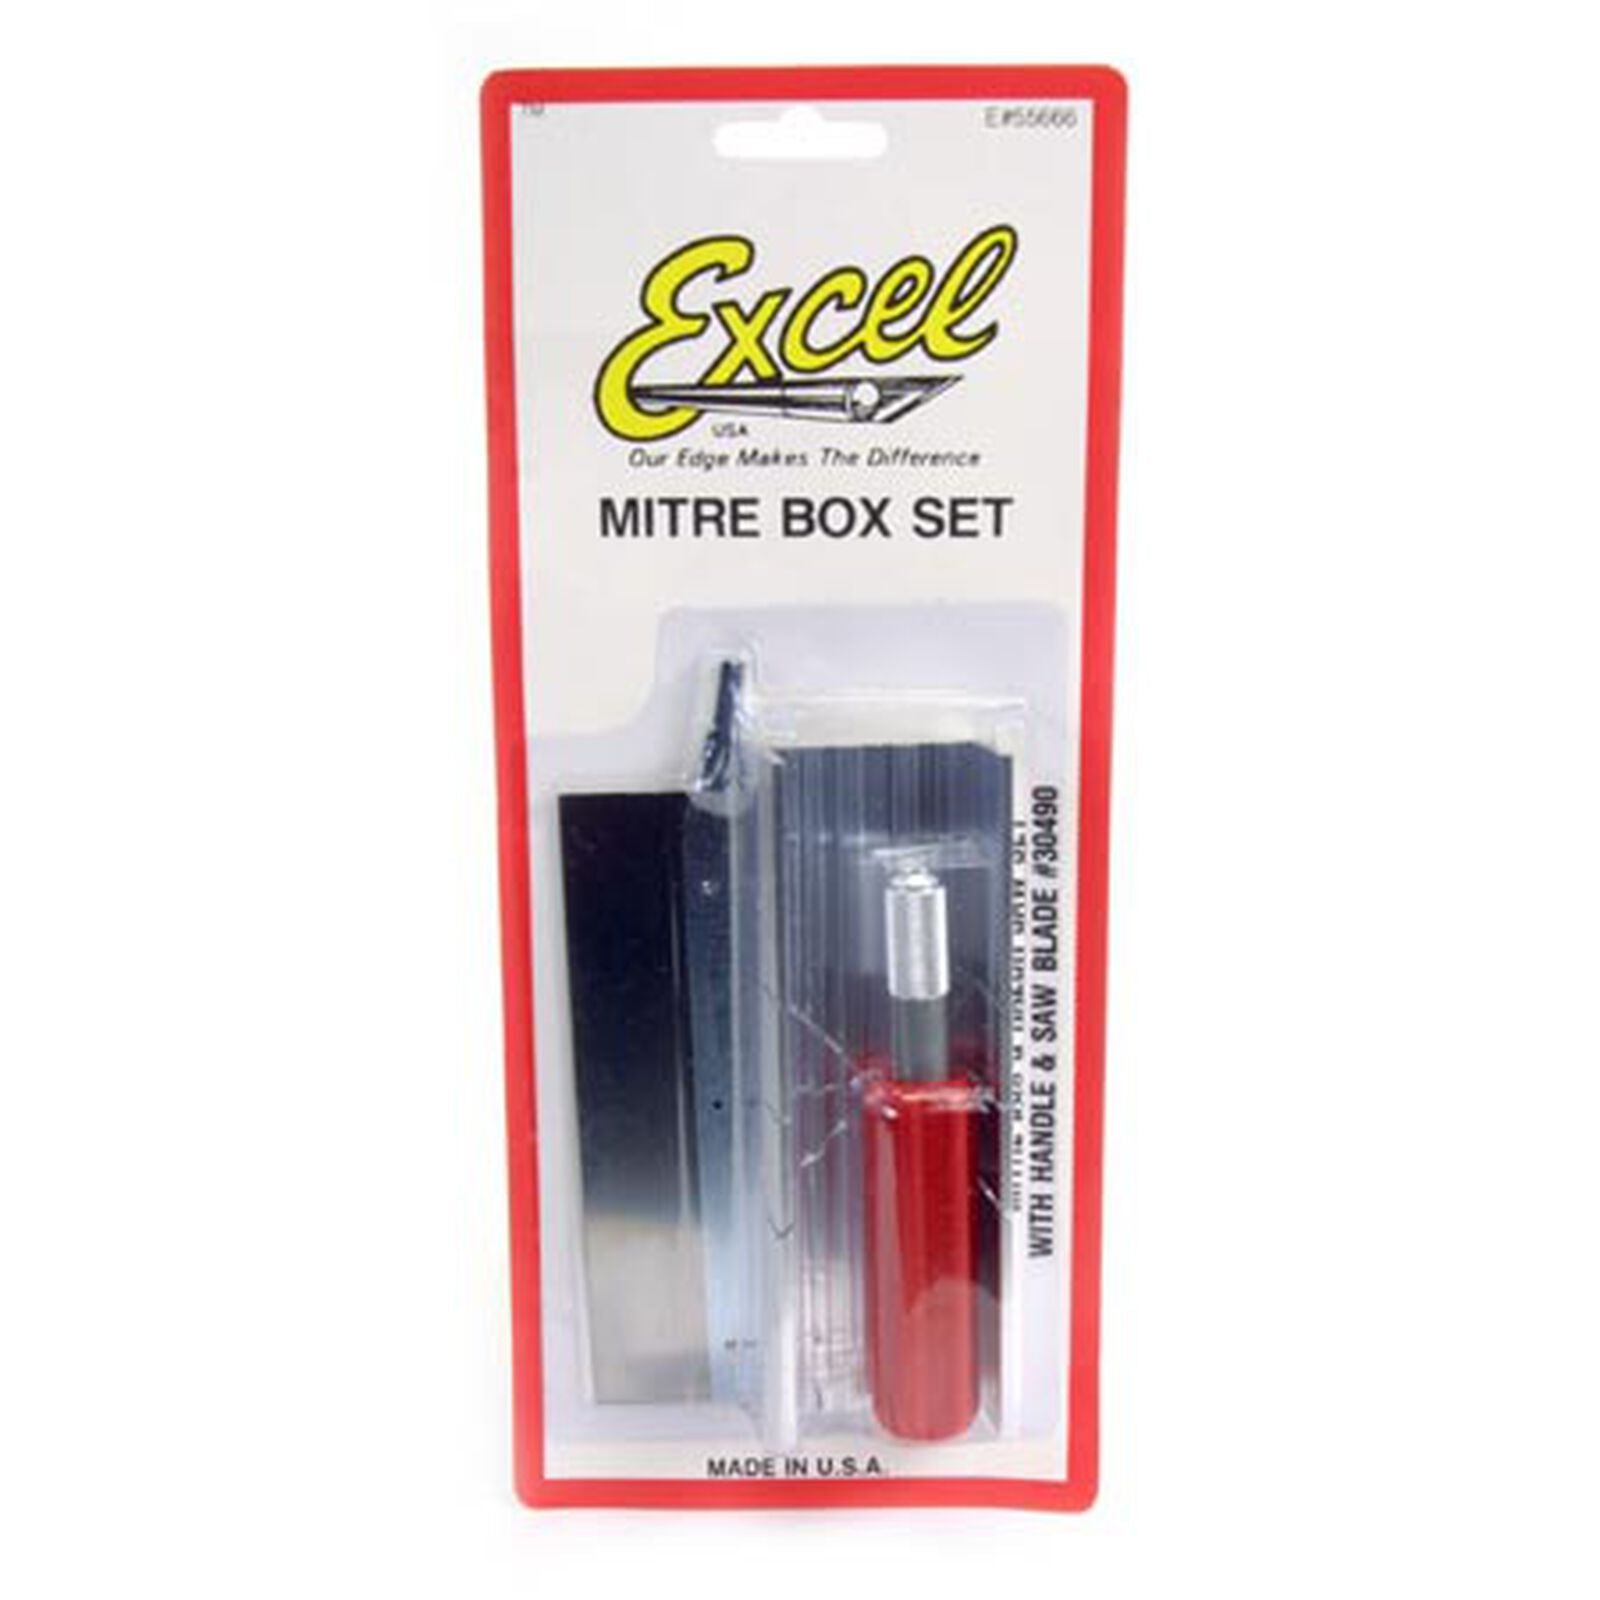 EXCEL 55666 Mitre Box with Handle & Blades